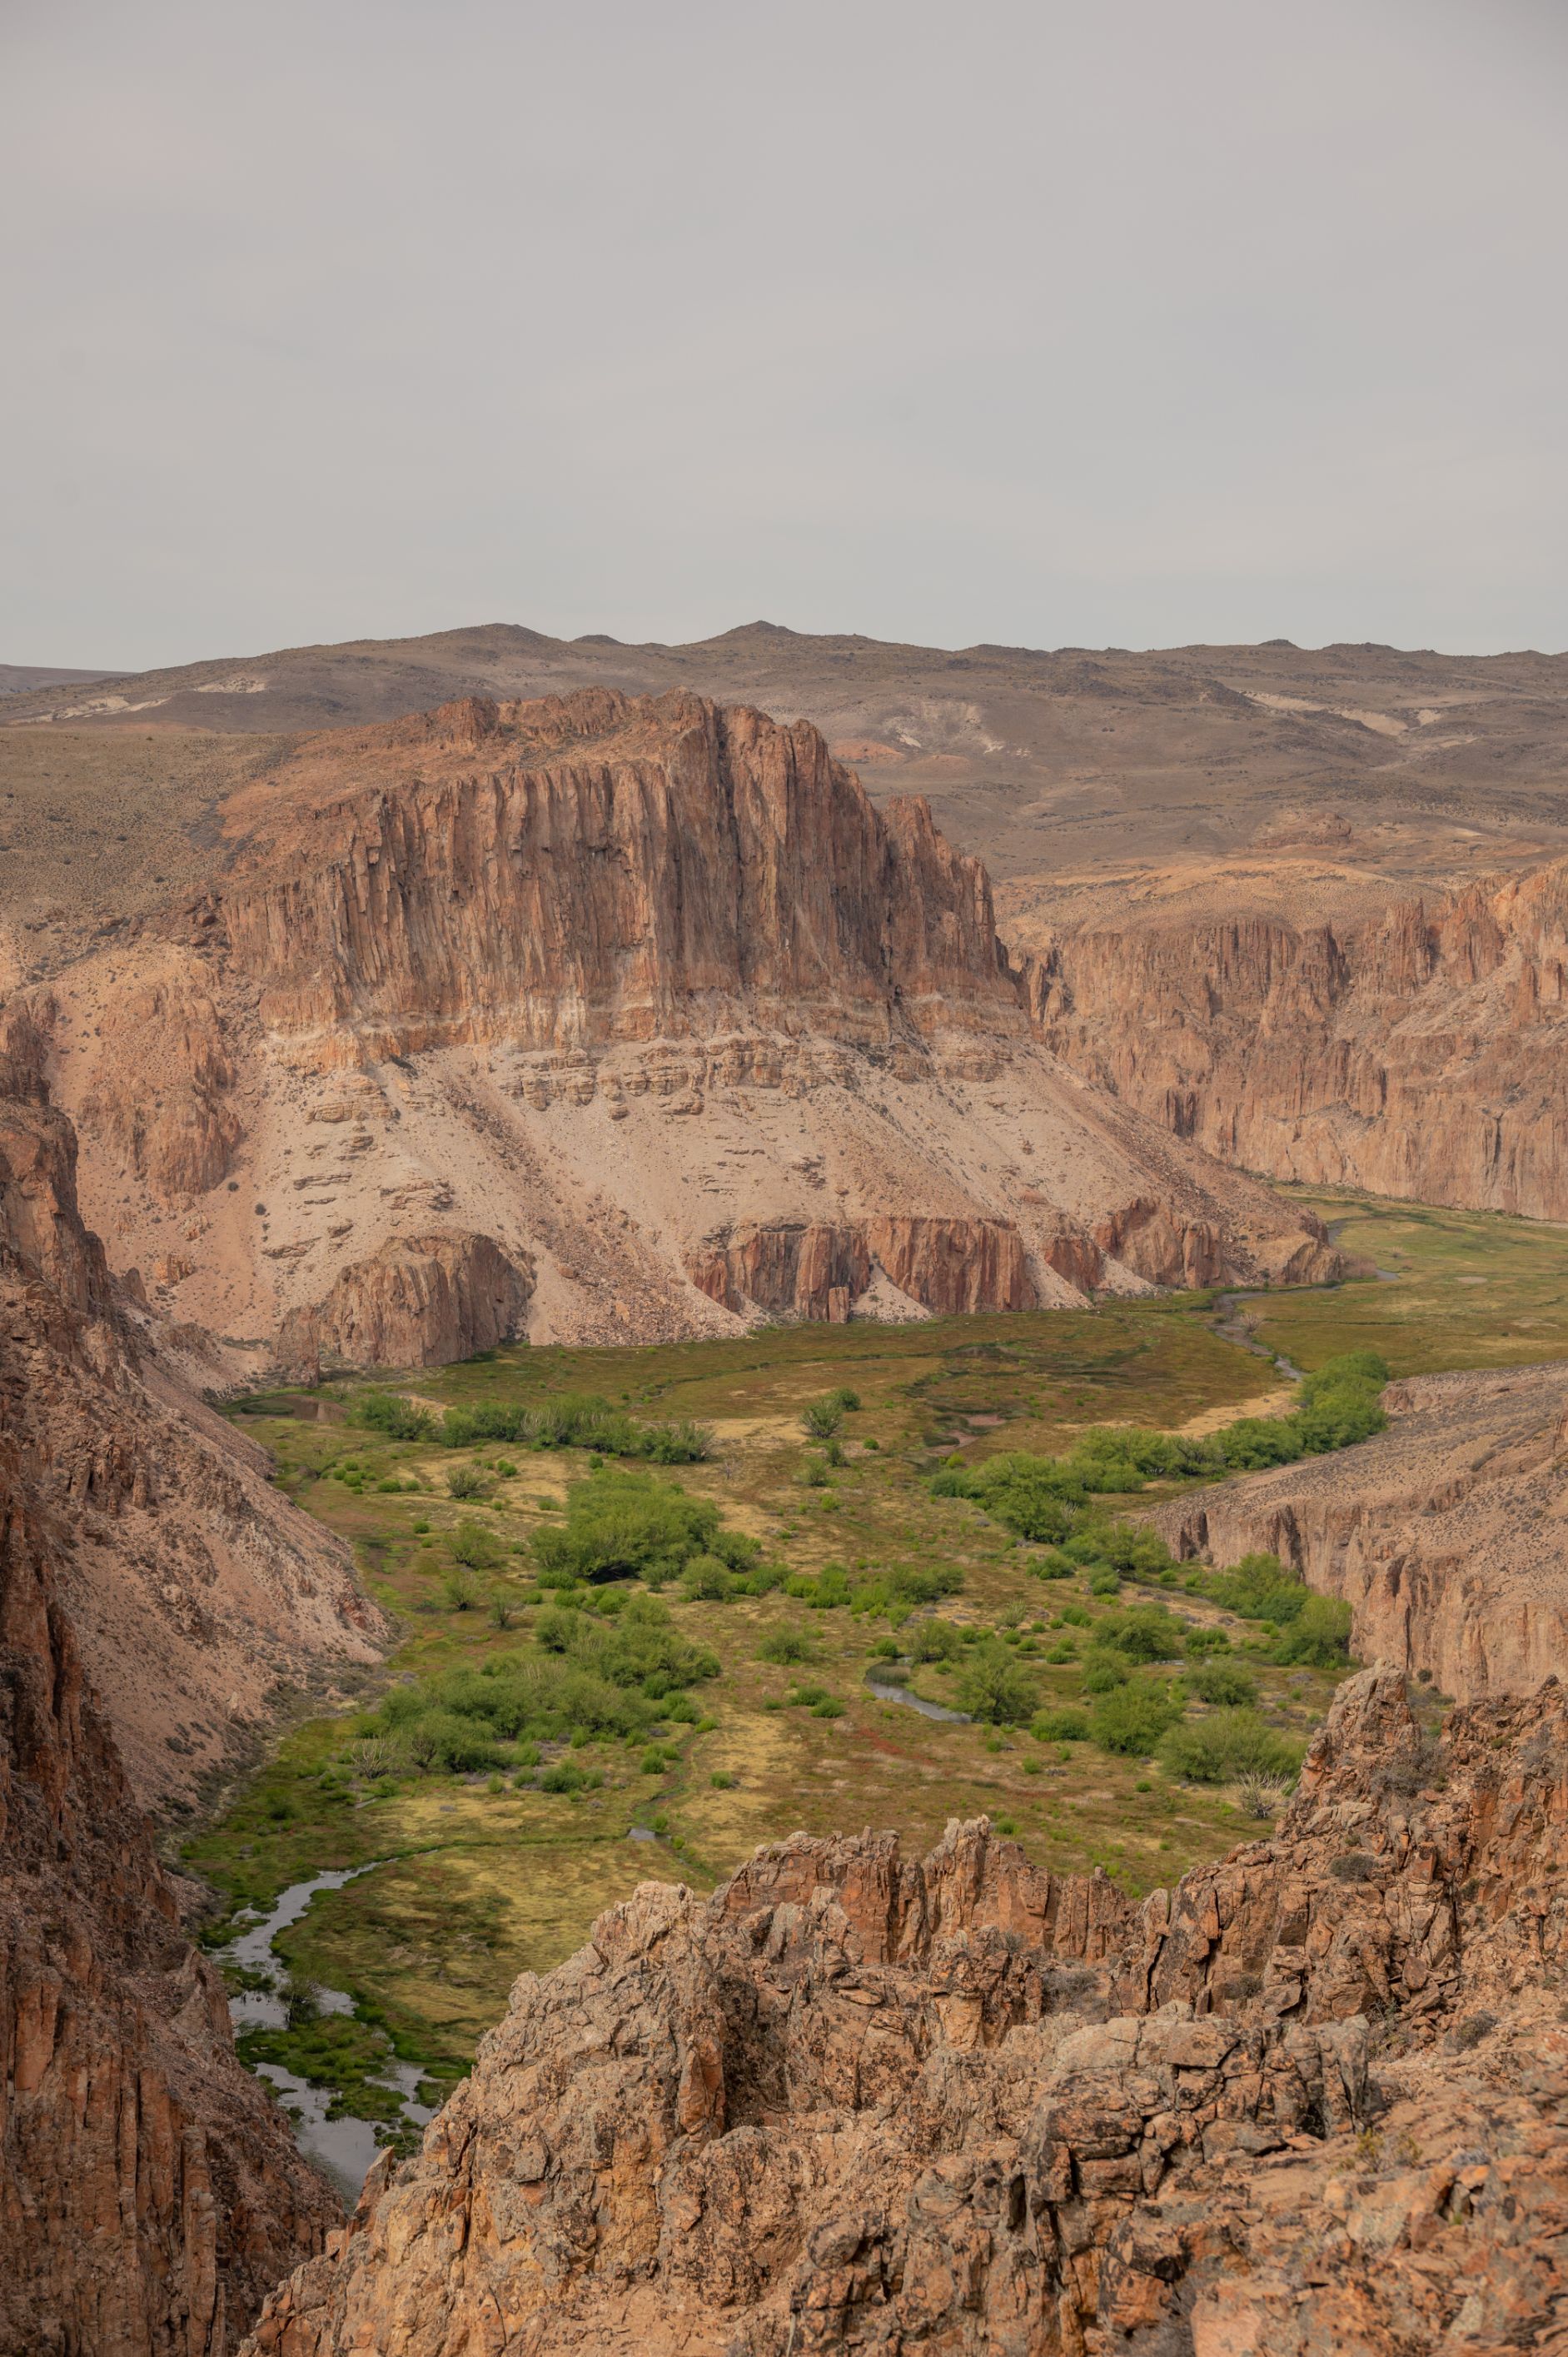 A cliff-top panorama of the Pinturas Canyon, which weaves and winds through the park. Photo: Horacio Barbieri